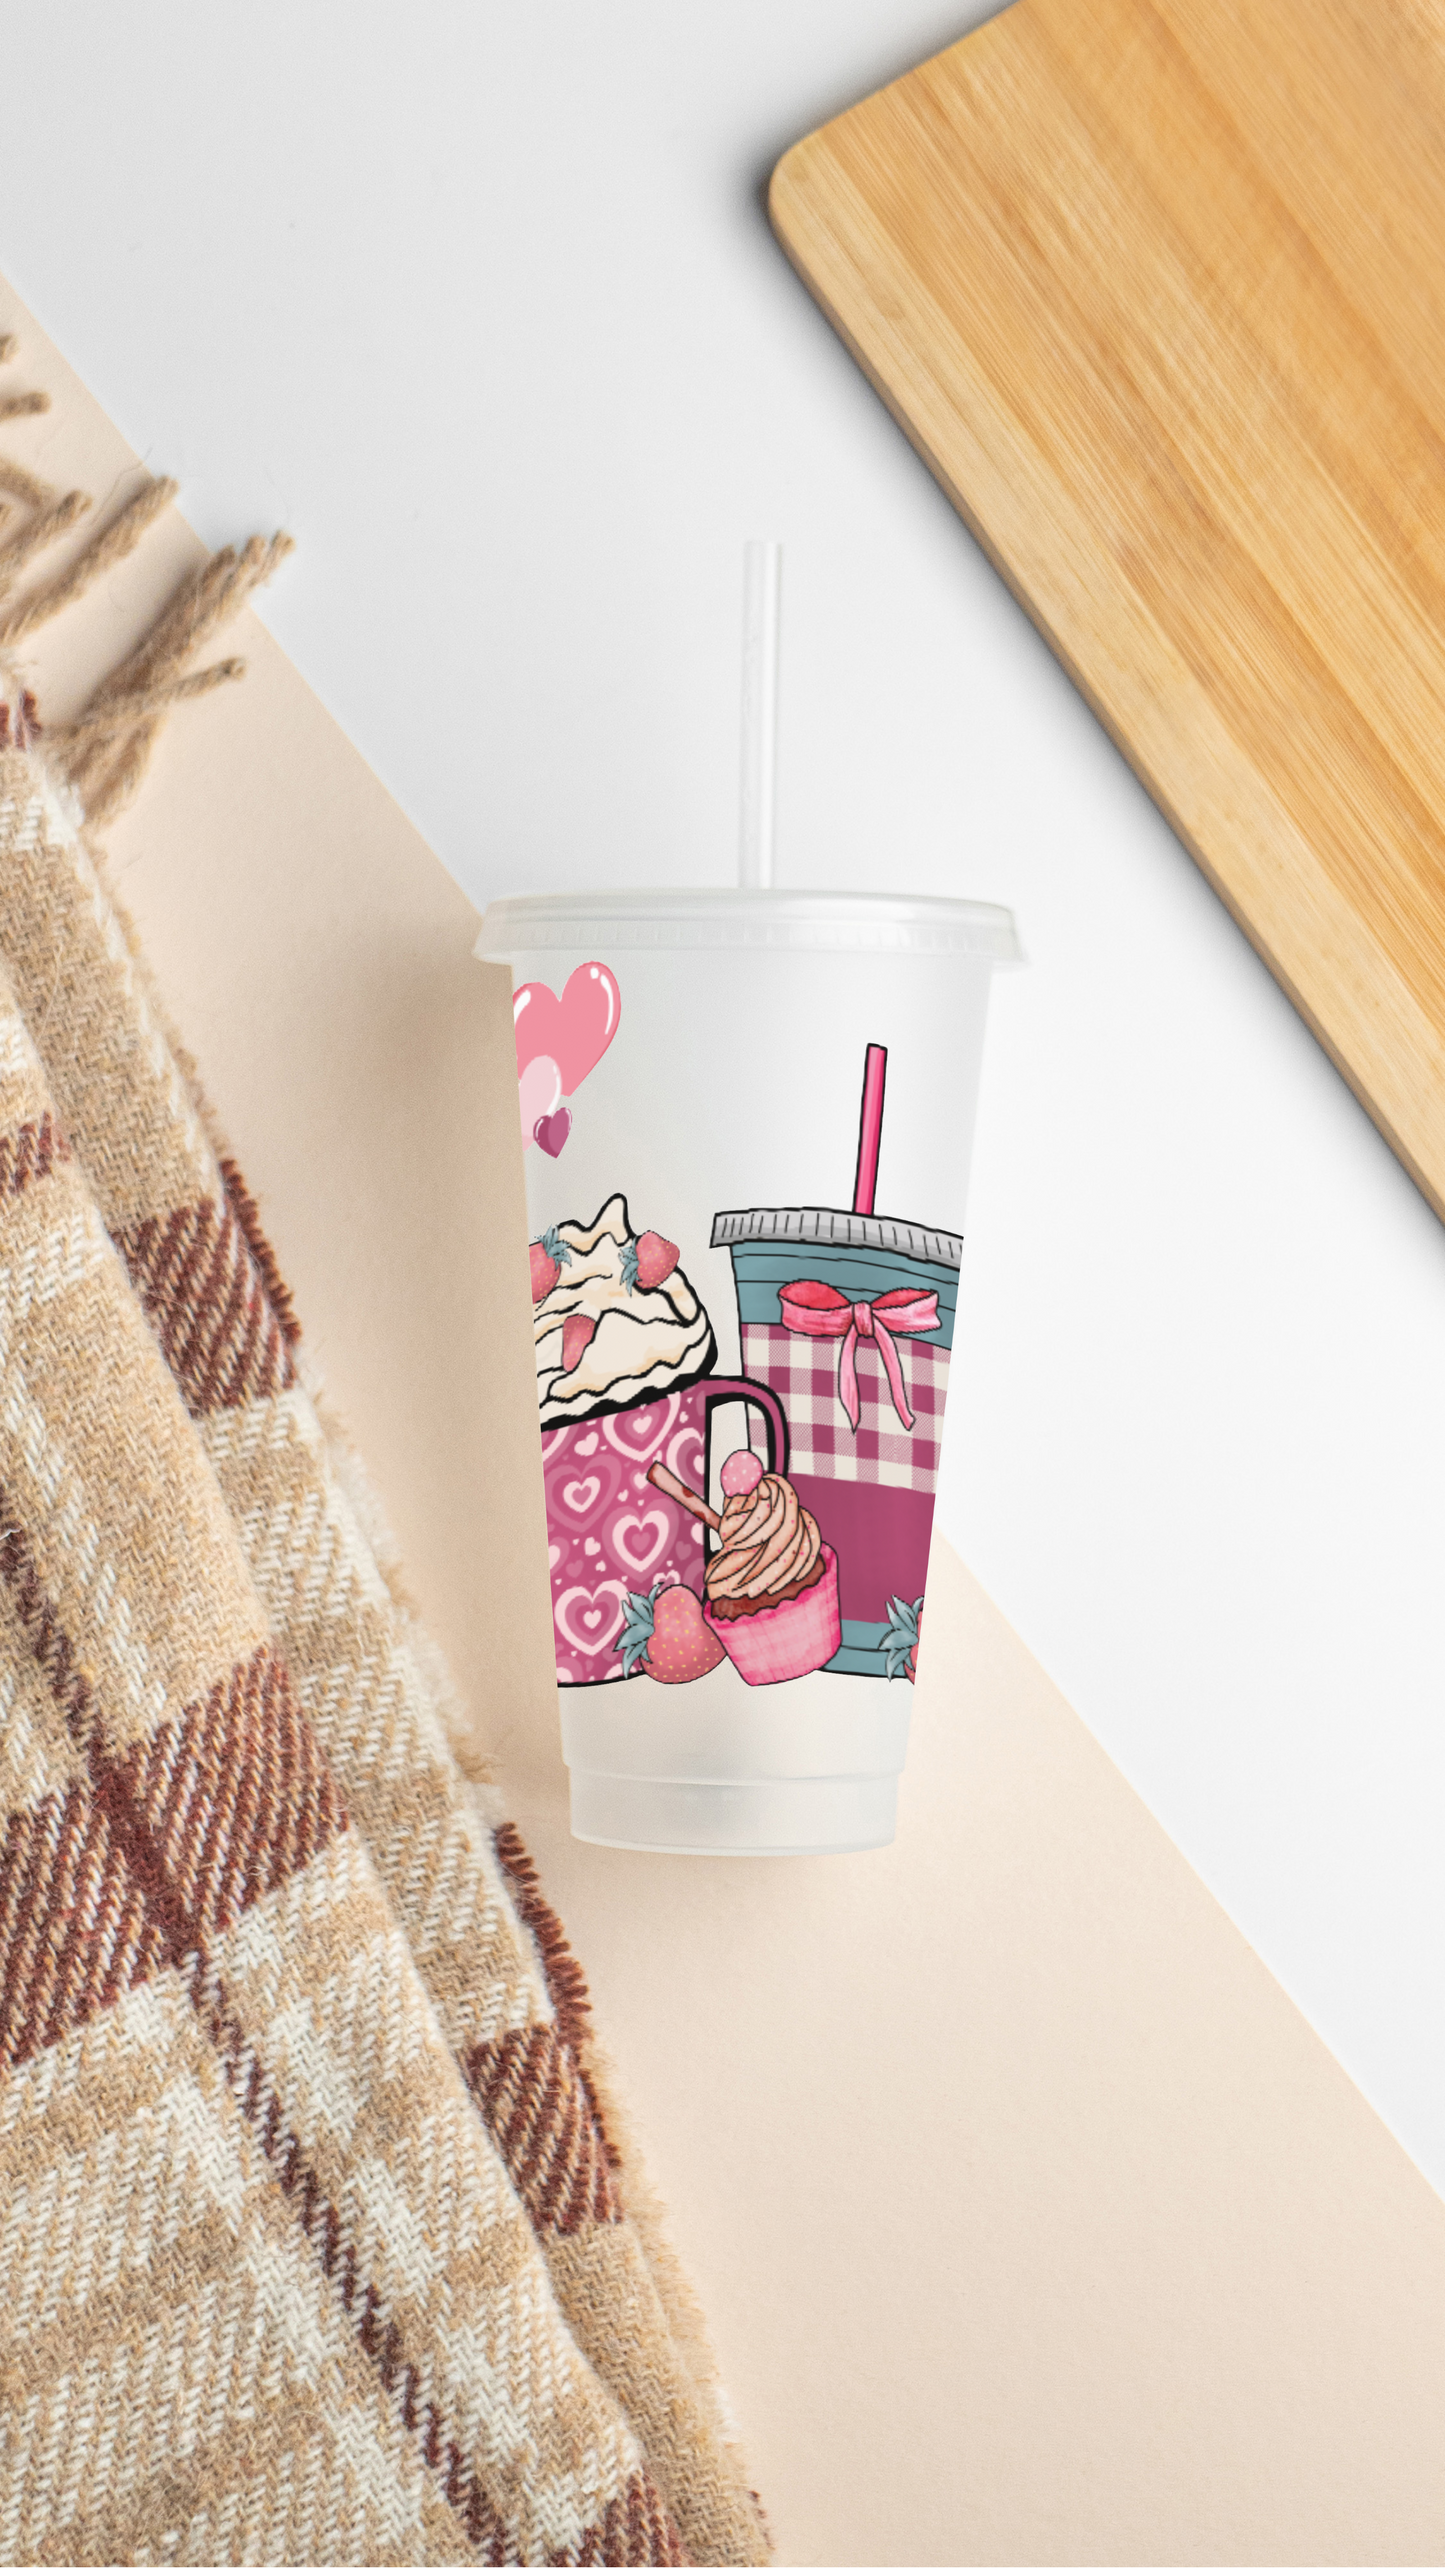 Ready To Apply Cup Wrap - Coffee Latte Drink Love Hearts Design